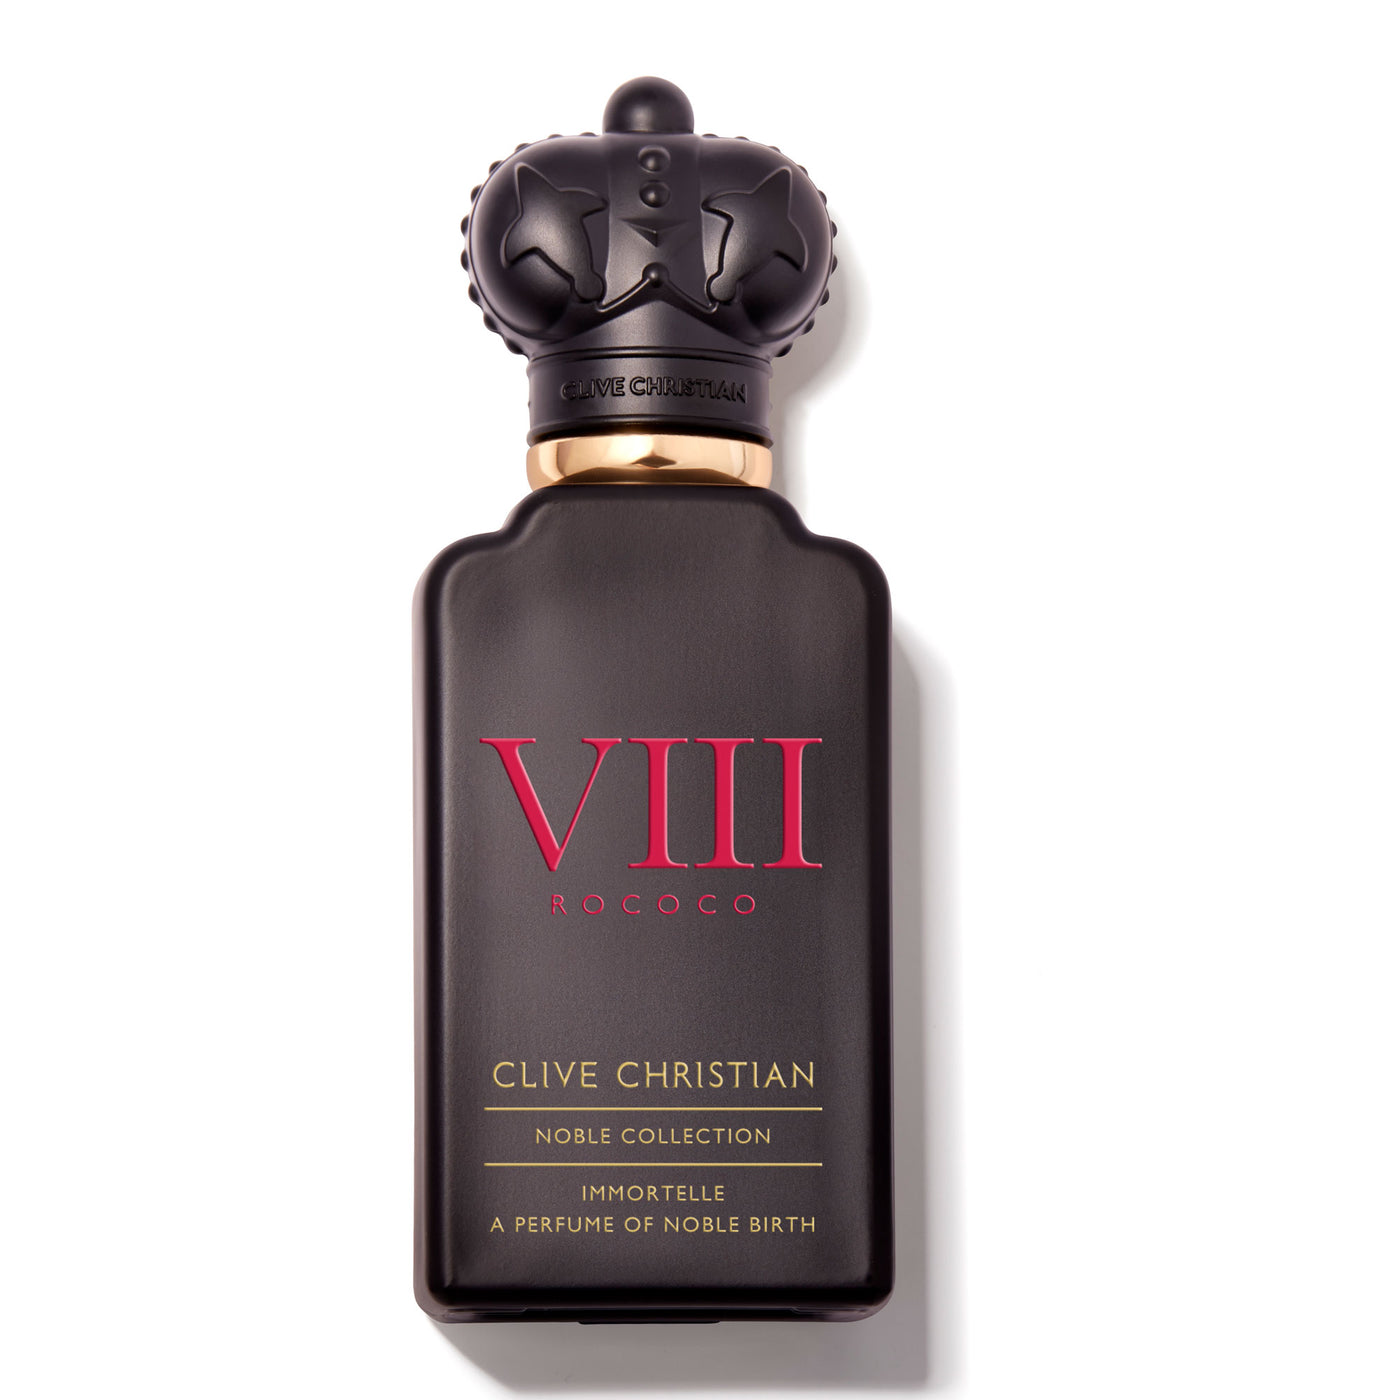 Clive Christian Rocco Immortelle - Noble Collection - 50ml - Gharyal by Collectibles 